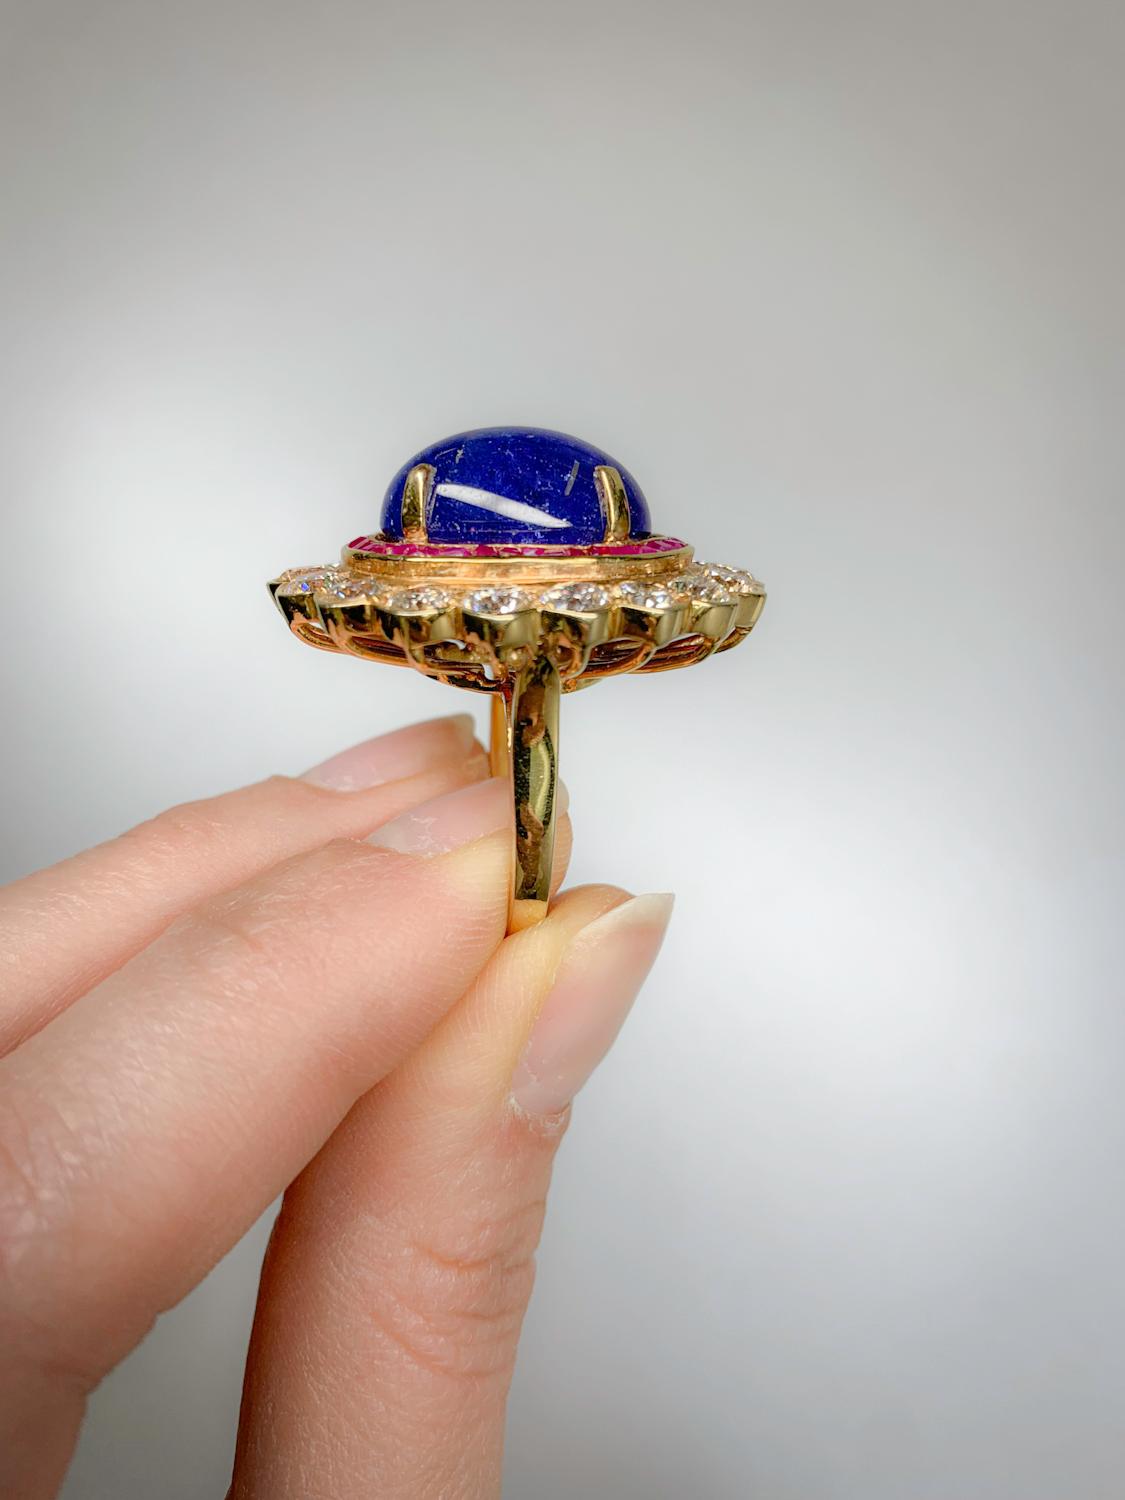 Cabochon 19.61 Carat Tanzanite with 1.41 Carat Ruby and 4.89 Carat Diamond 18K Gold Ring For Sale